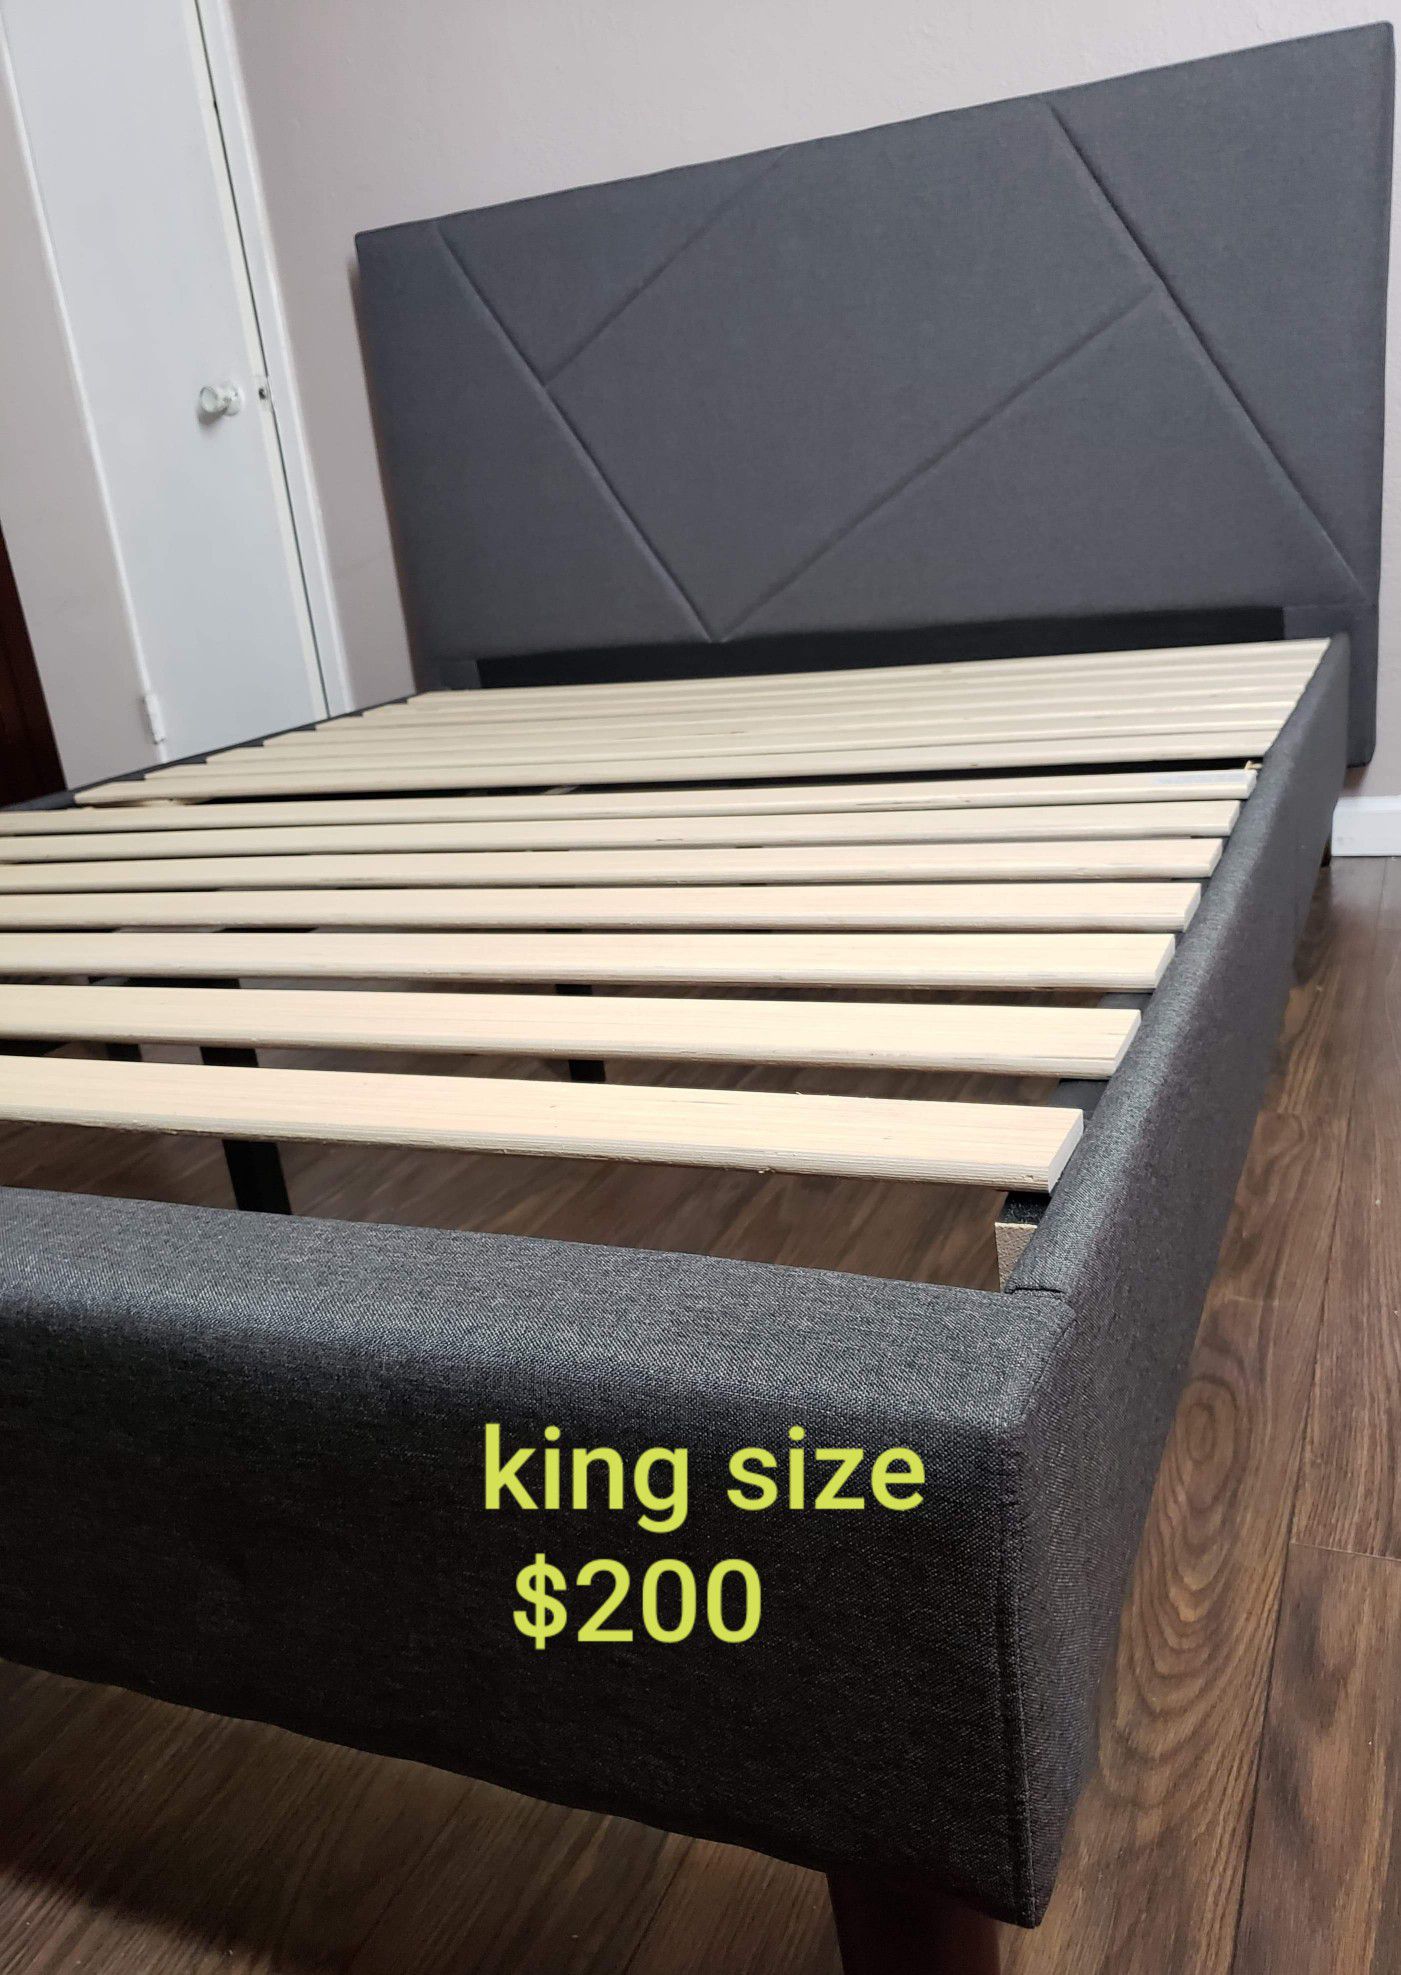 Bed frame king size. Brand new. Free delivery $200